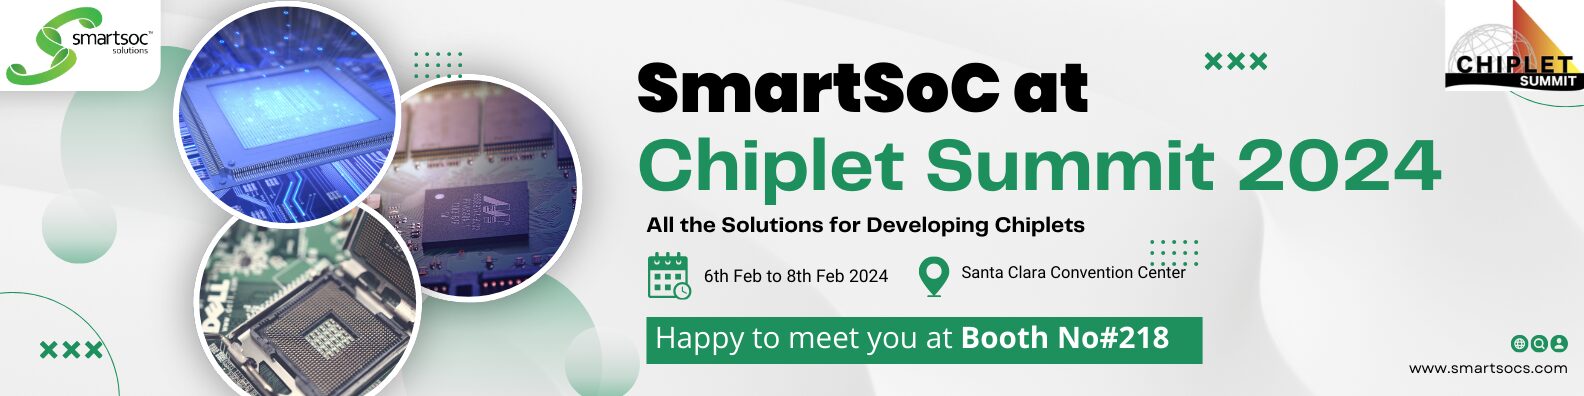 Join us at Chiplet Summit 2024